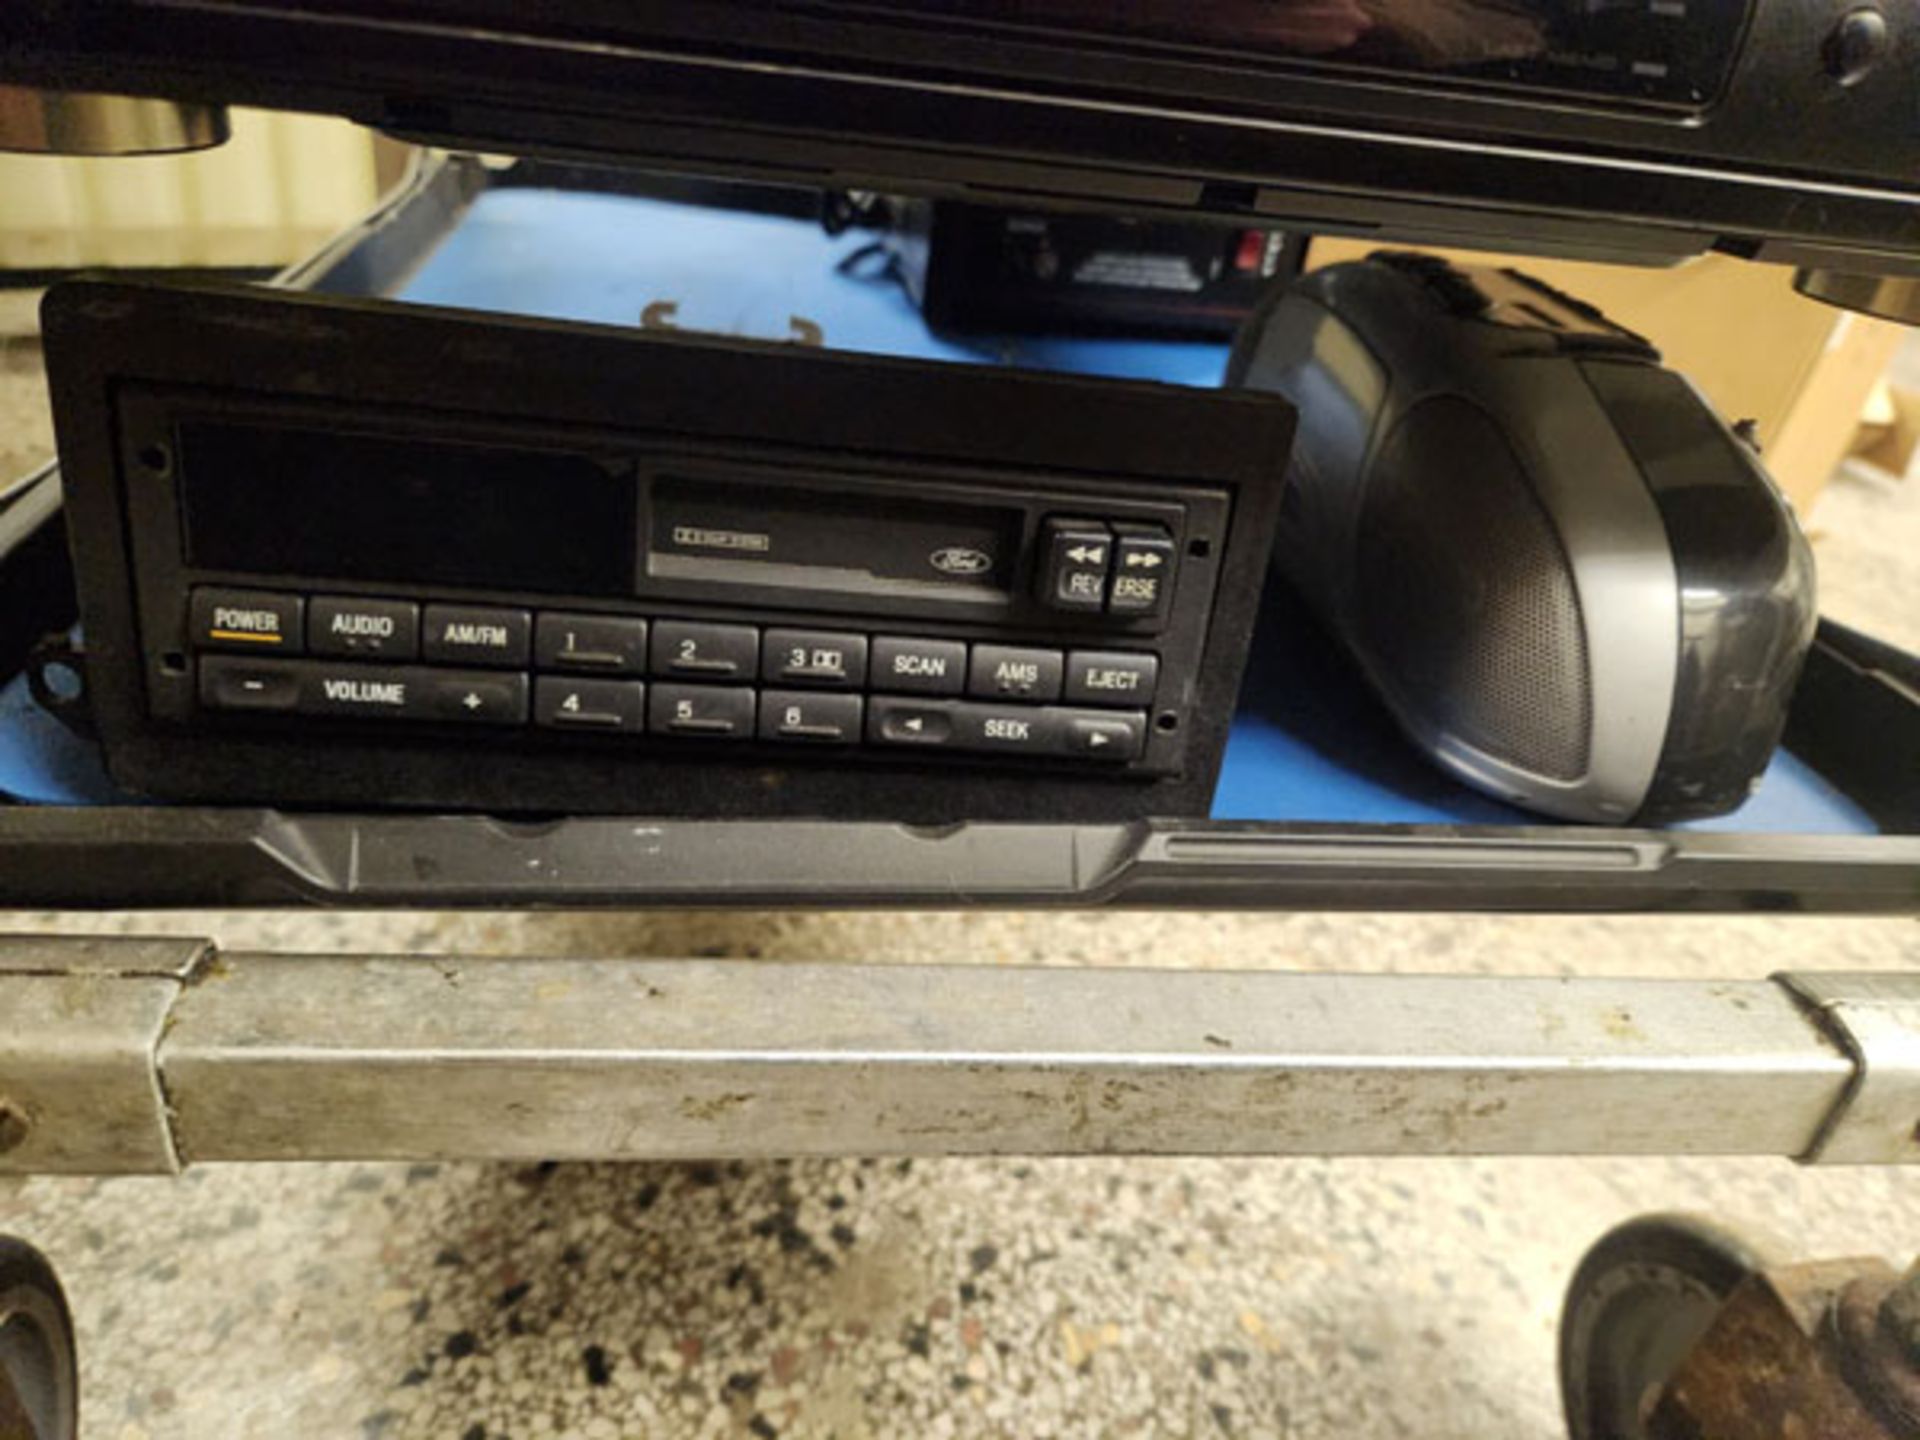 LOT OF 3 ASSORTED ELECTRONICS - DVD PLAYER(HAS A STICKER THAT SAYS DOES NOT PLAY), CAR STEREO CASSET - Image 4 of 5